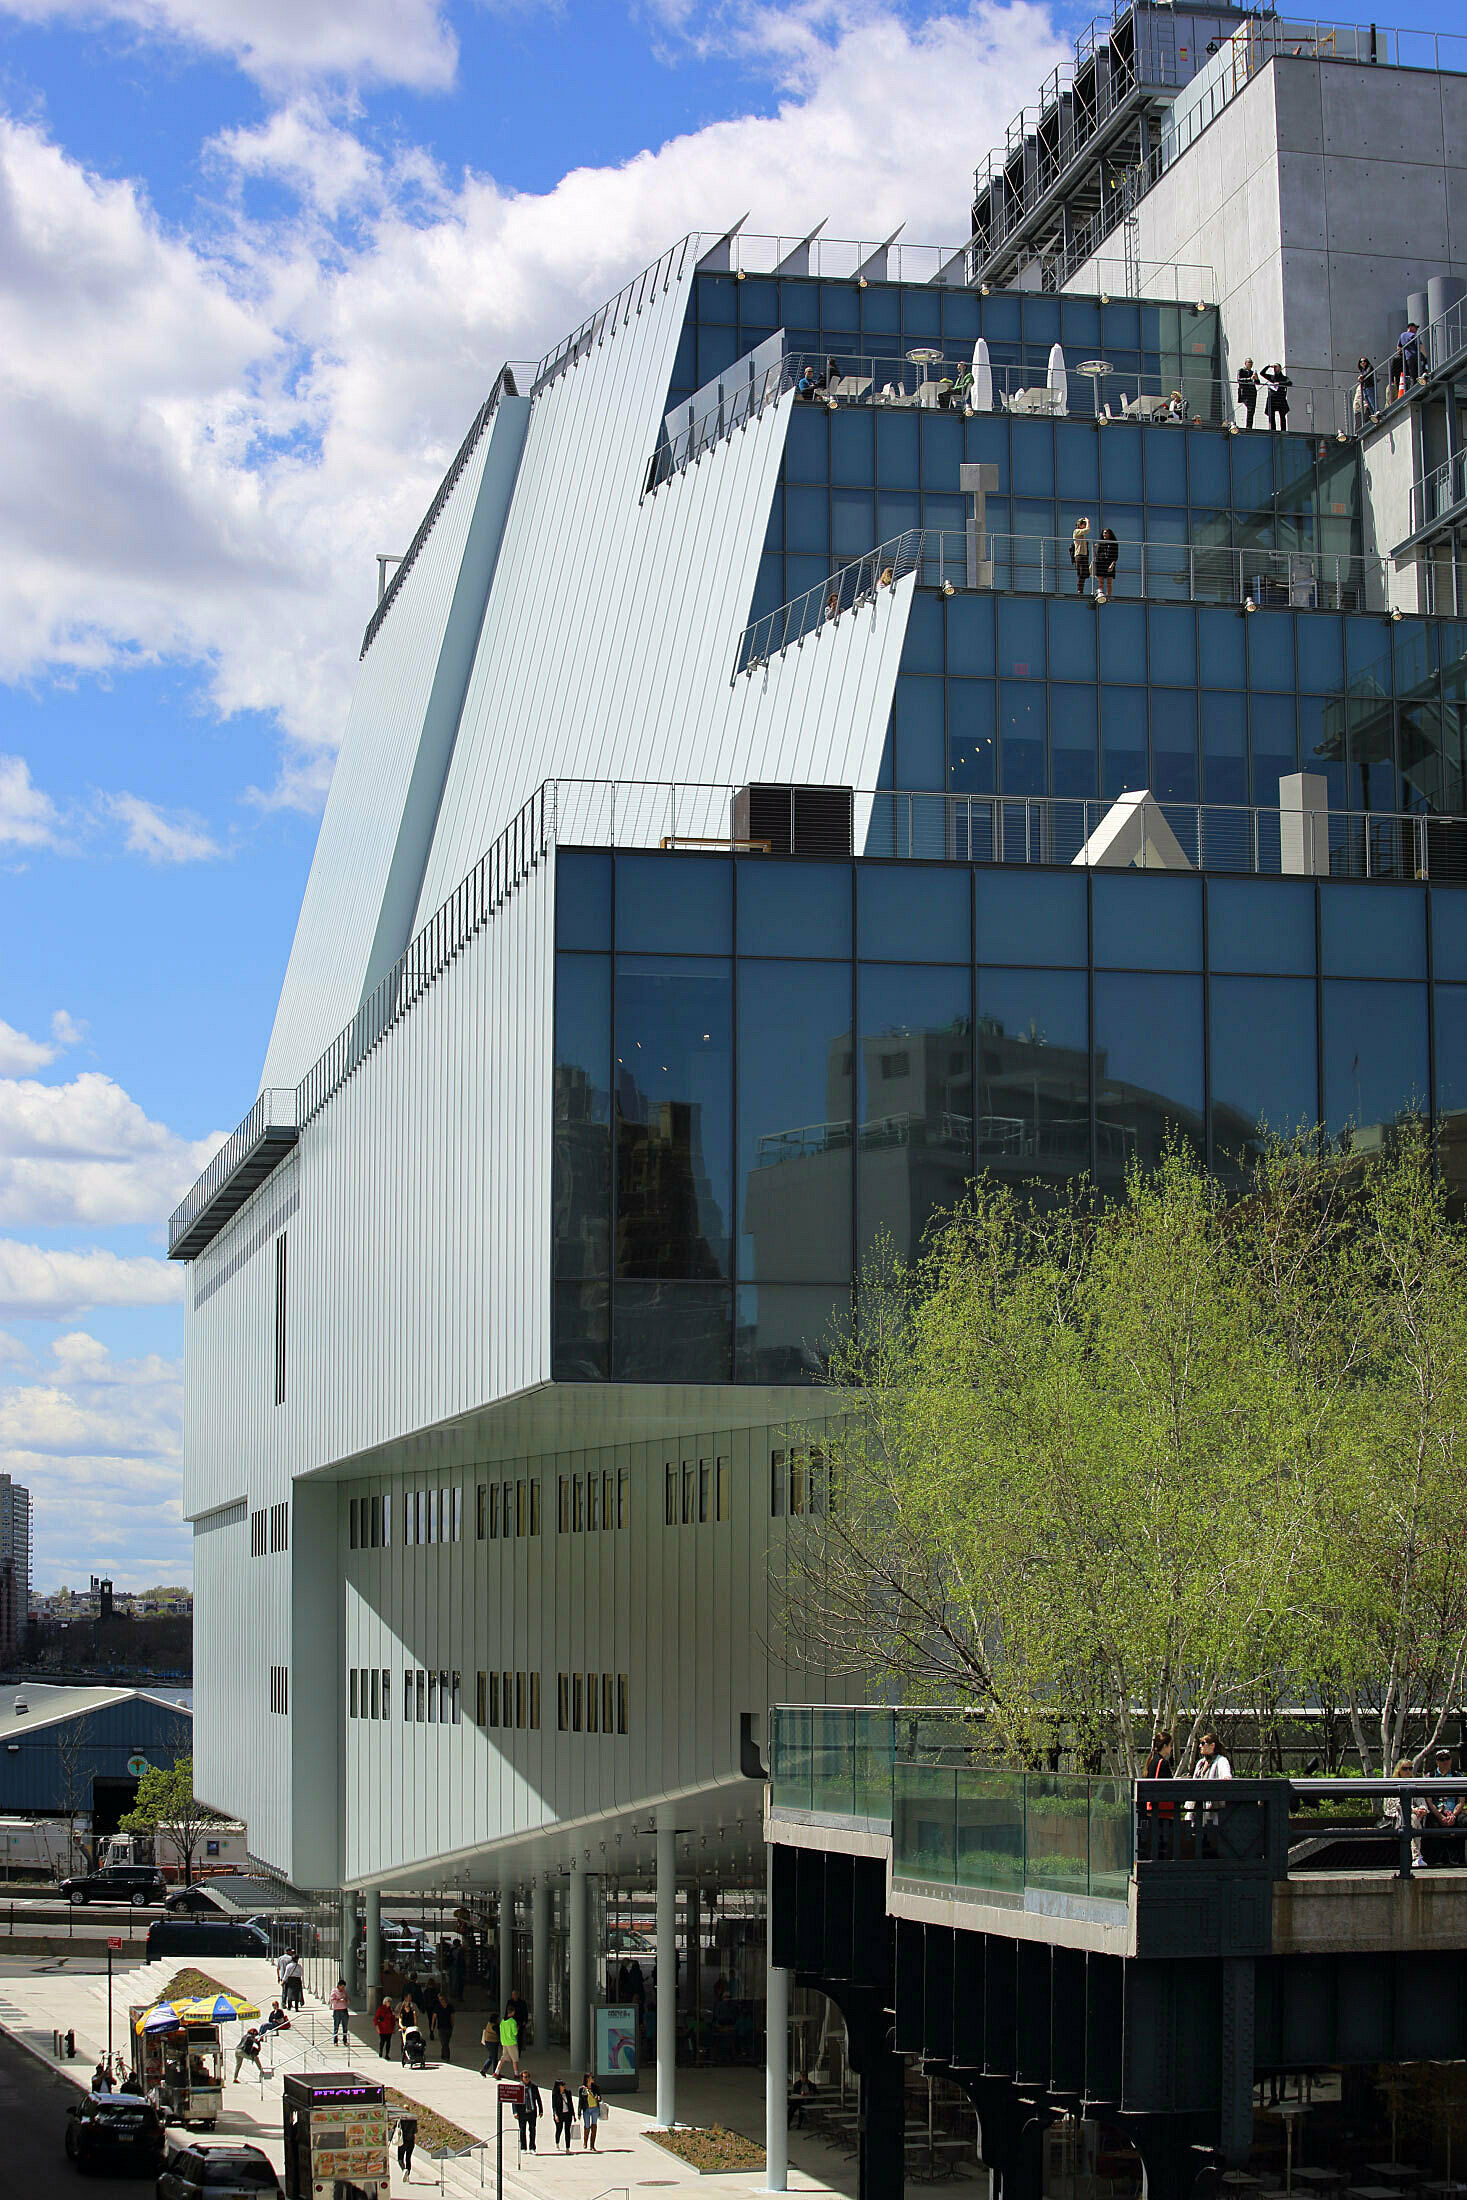 The Whitney Museum of American Art. A view of the building facing the Hudson River